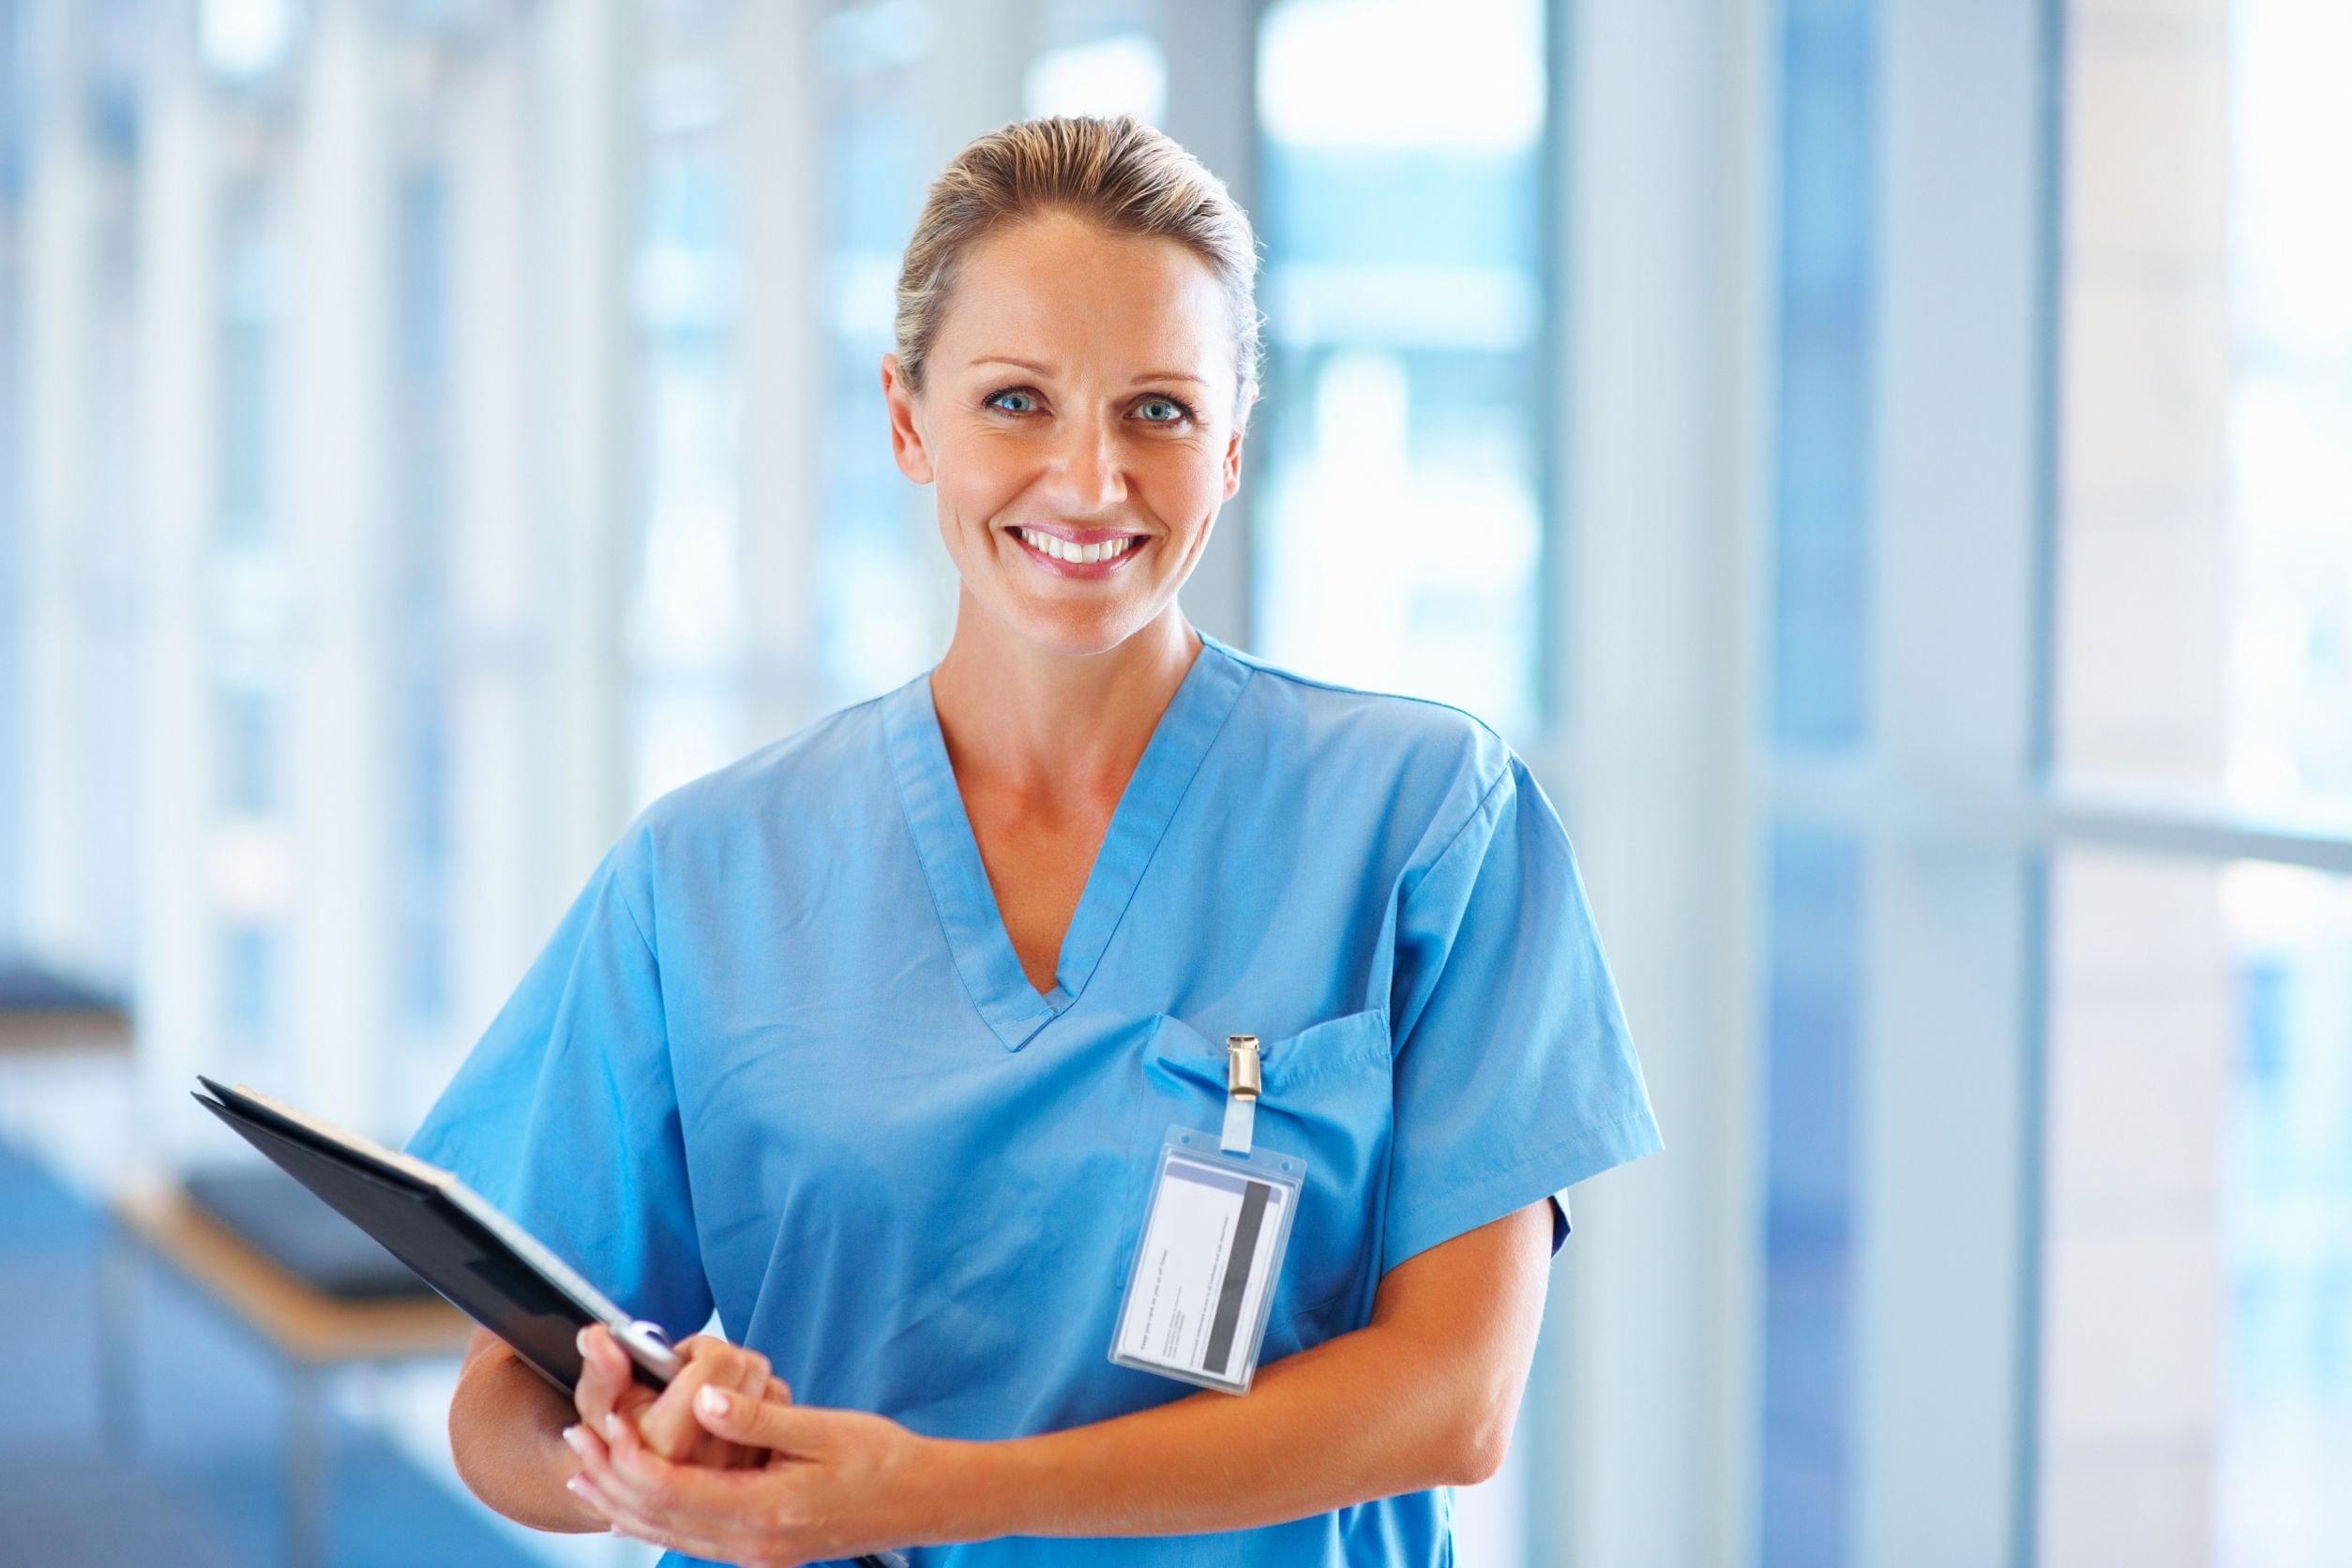 Physician assistant jobs in palm springs